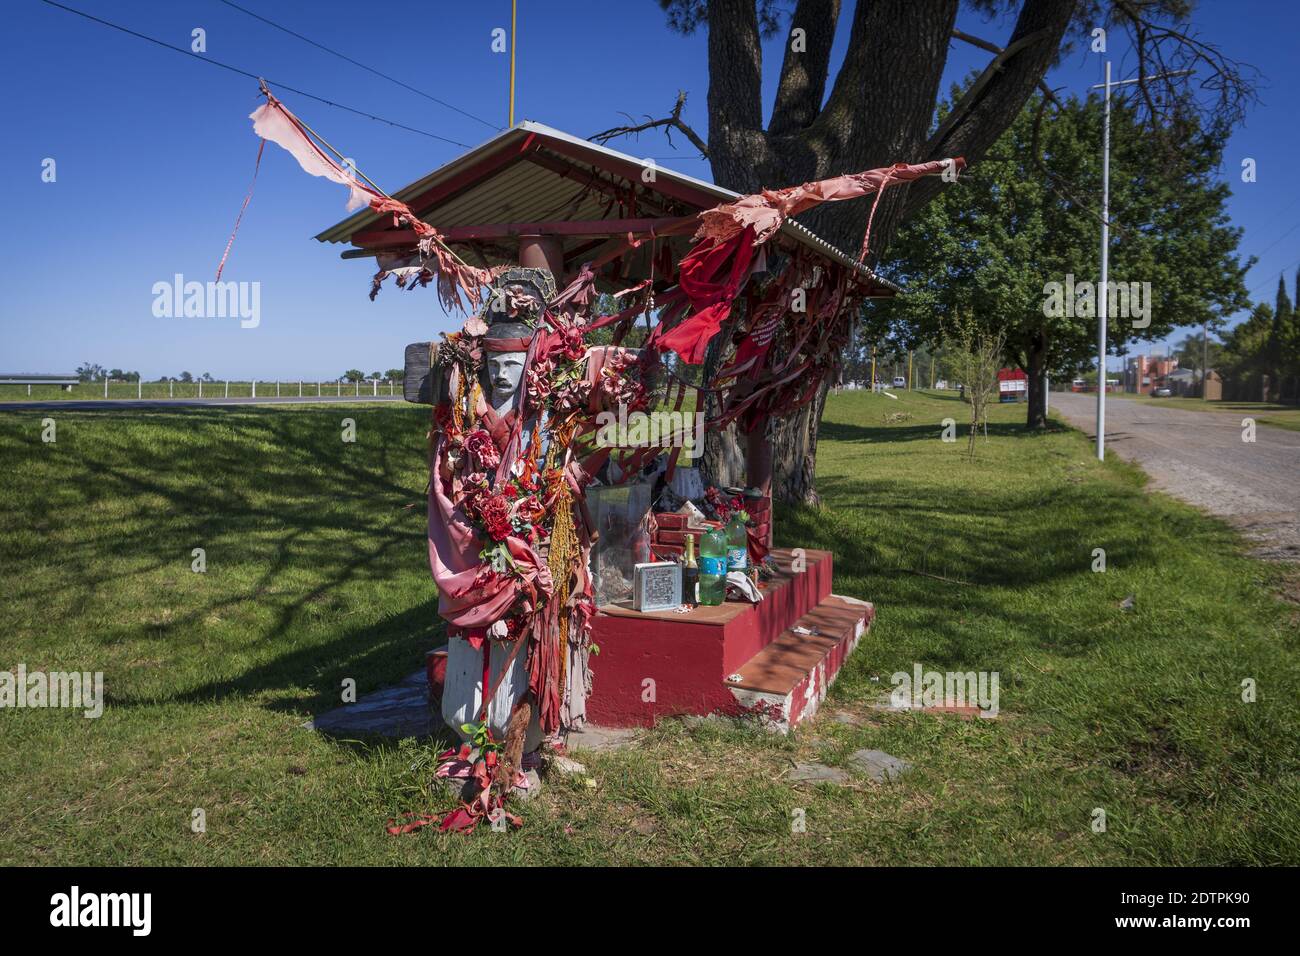 FIRMAT, ARGENTINA - Dec 21, 2020: A shrine in honor of Gauchito Gil, the most prominent folk religious figure,  in the outskirts of Firmat, Santa Fe, Stock Photo